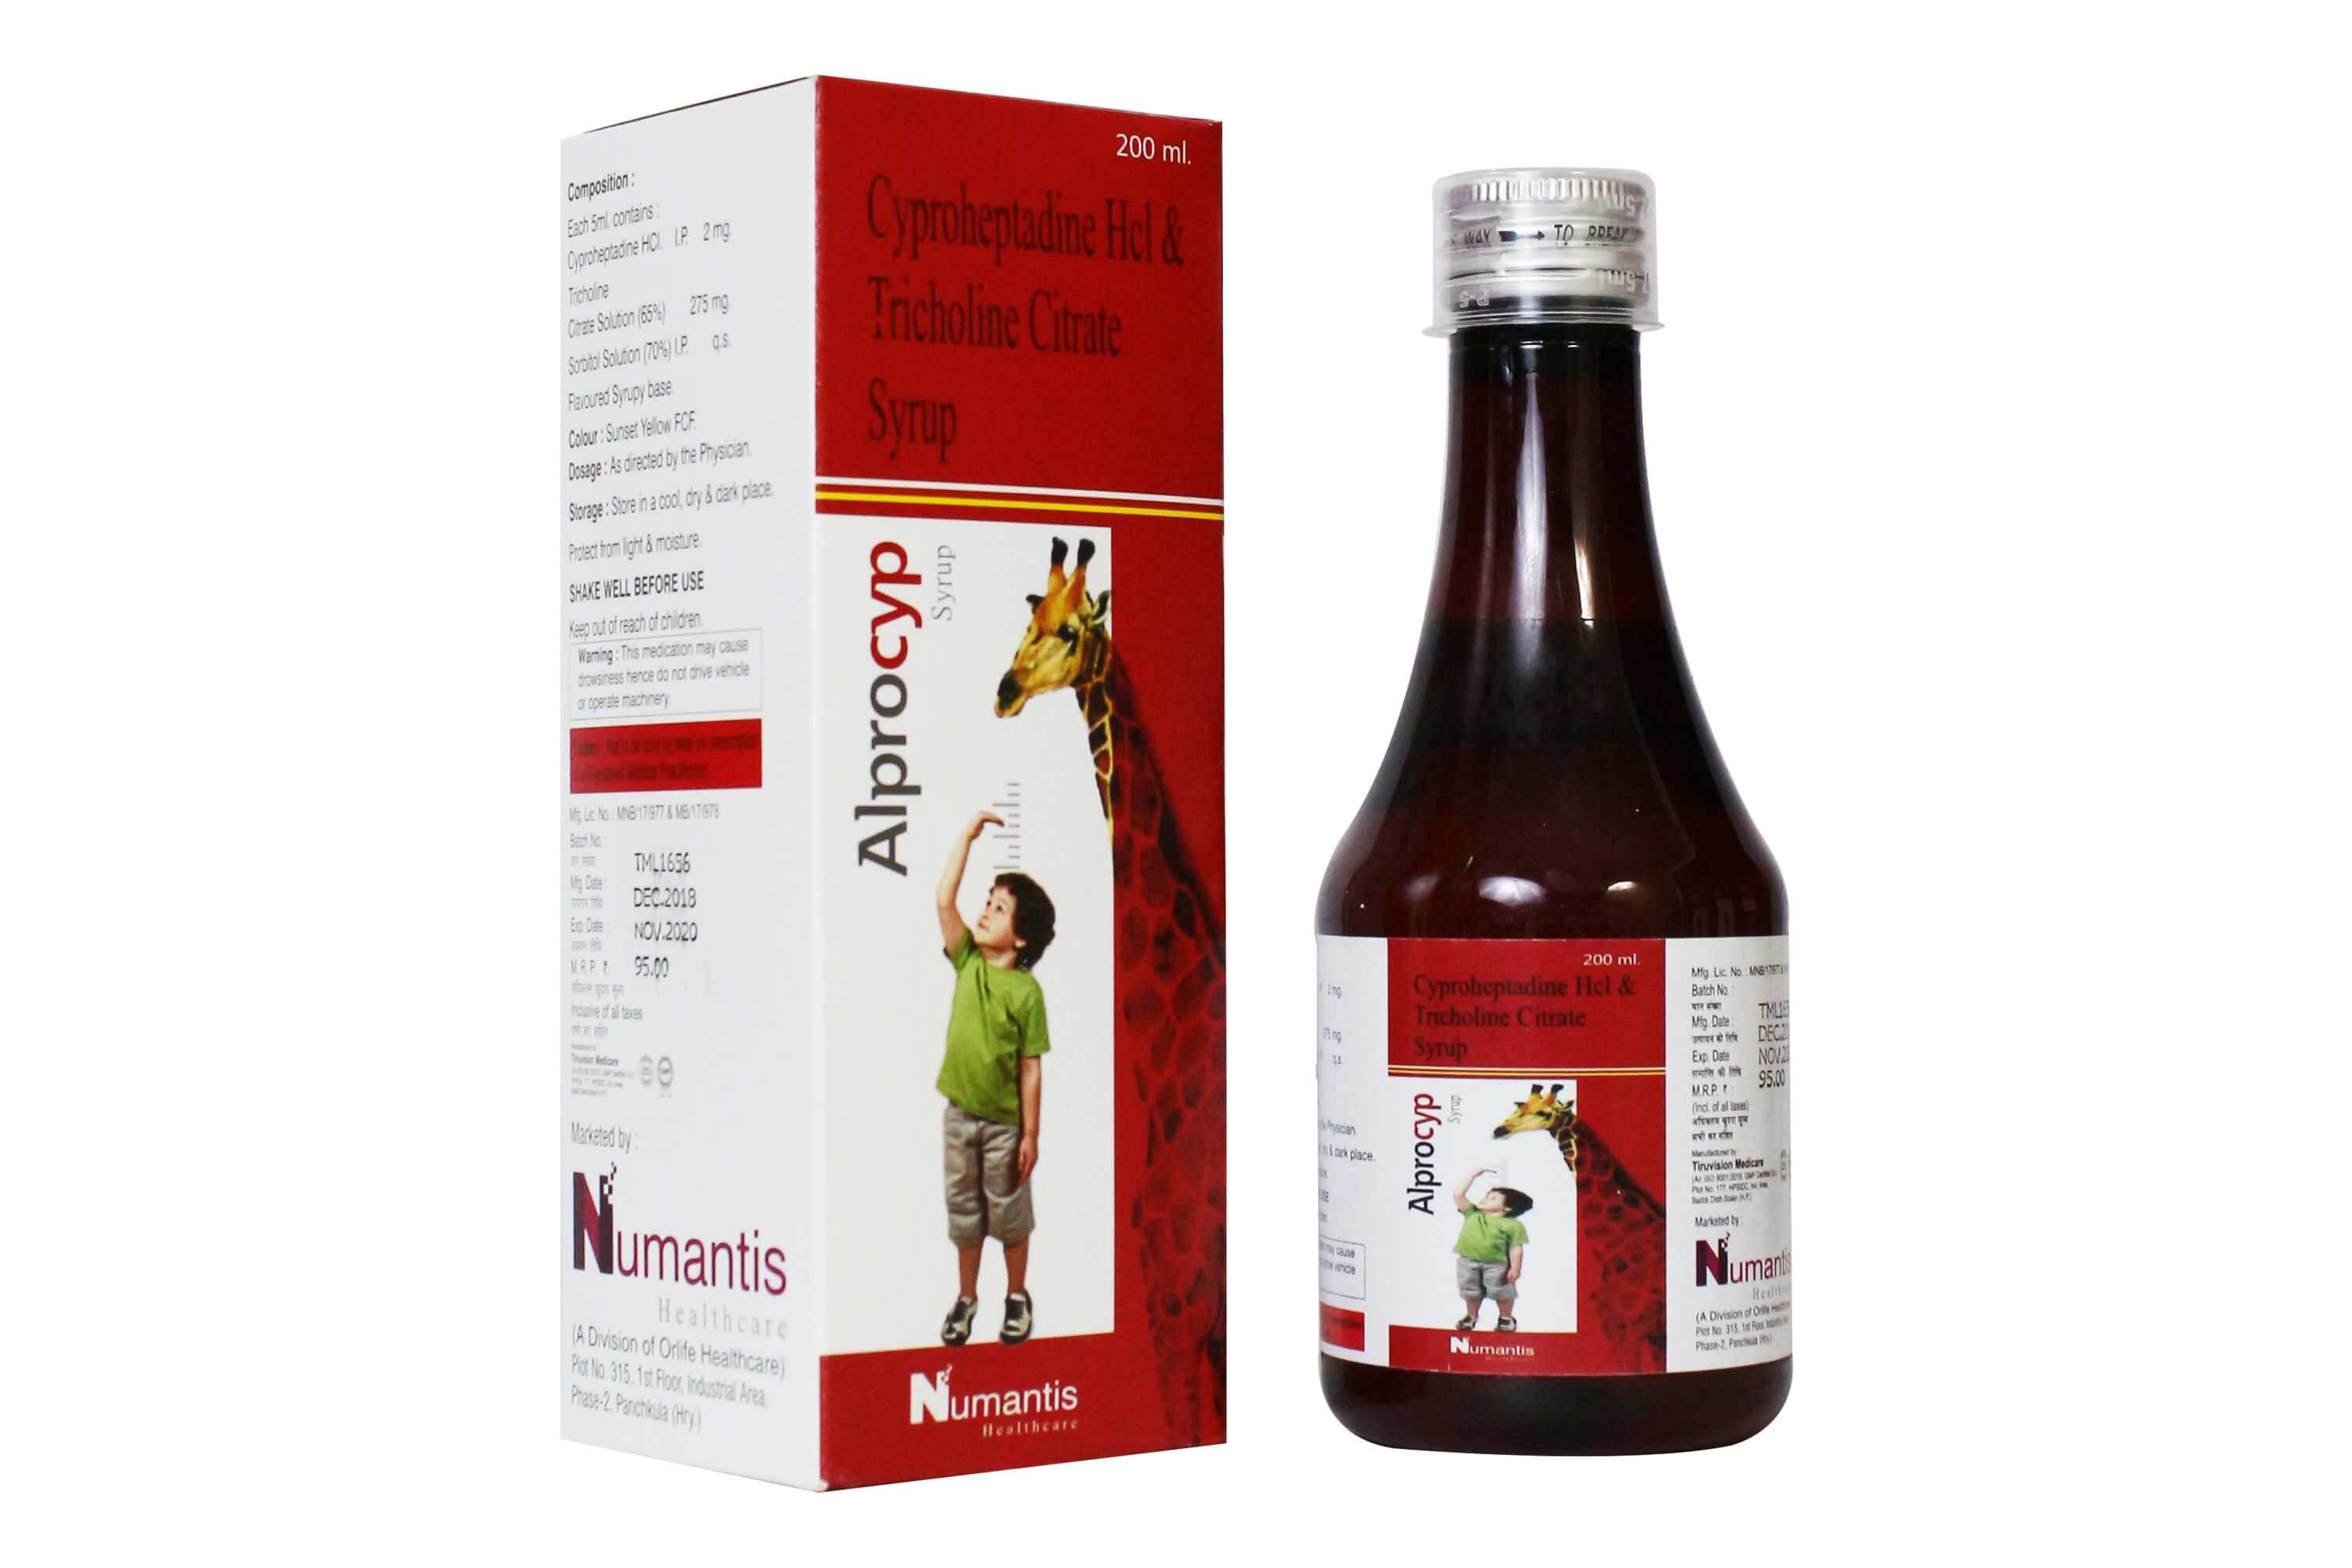 Product Name: Alprocyp, Compositions of Alprocyp are Cyprohepetadine  HCL & Tricholine Citrate Syrups  - Numantis Healthcare